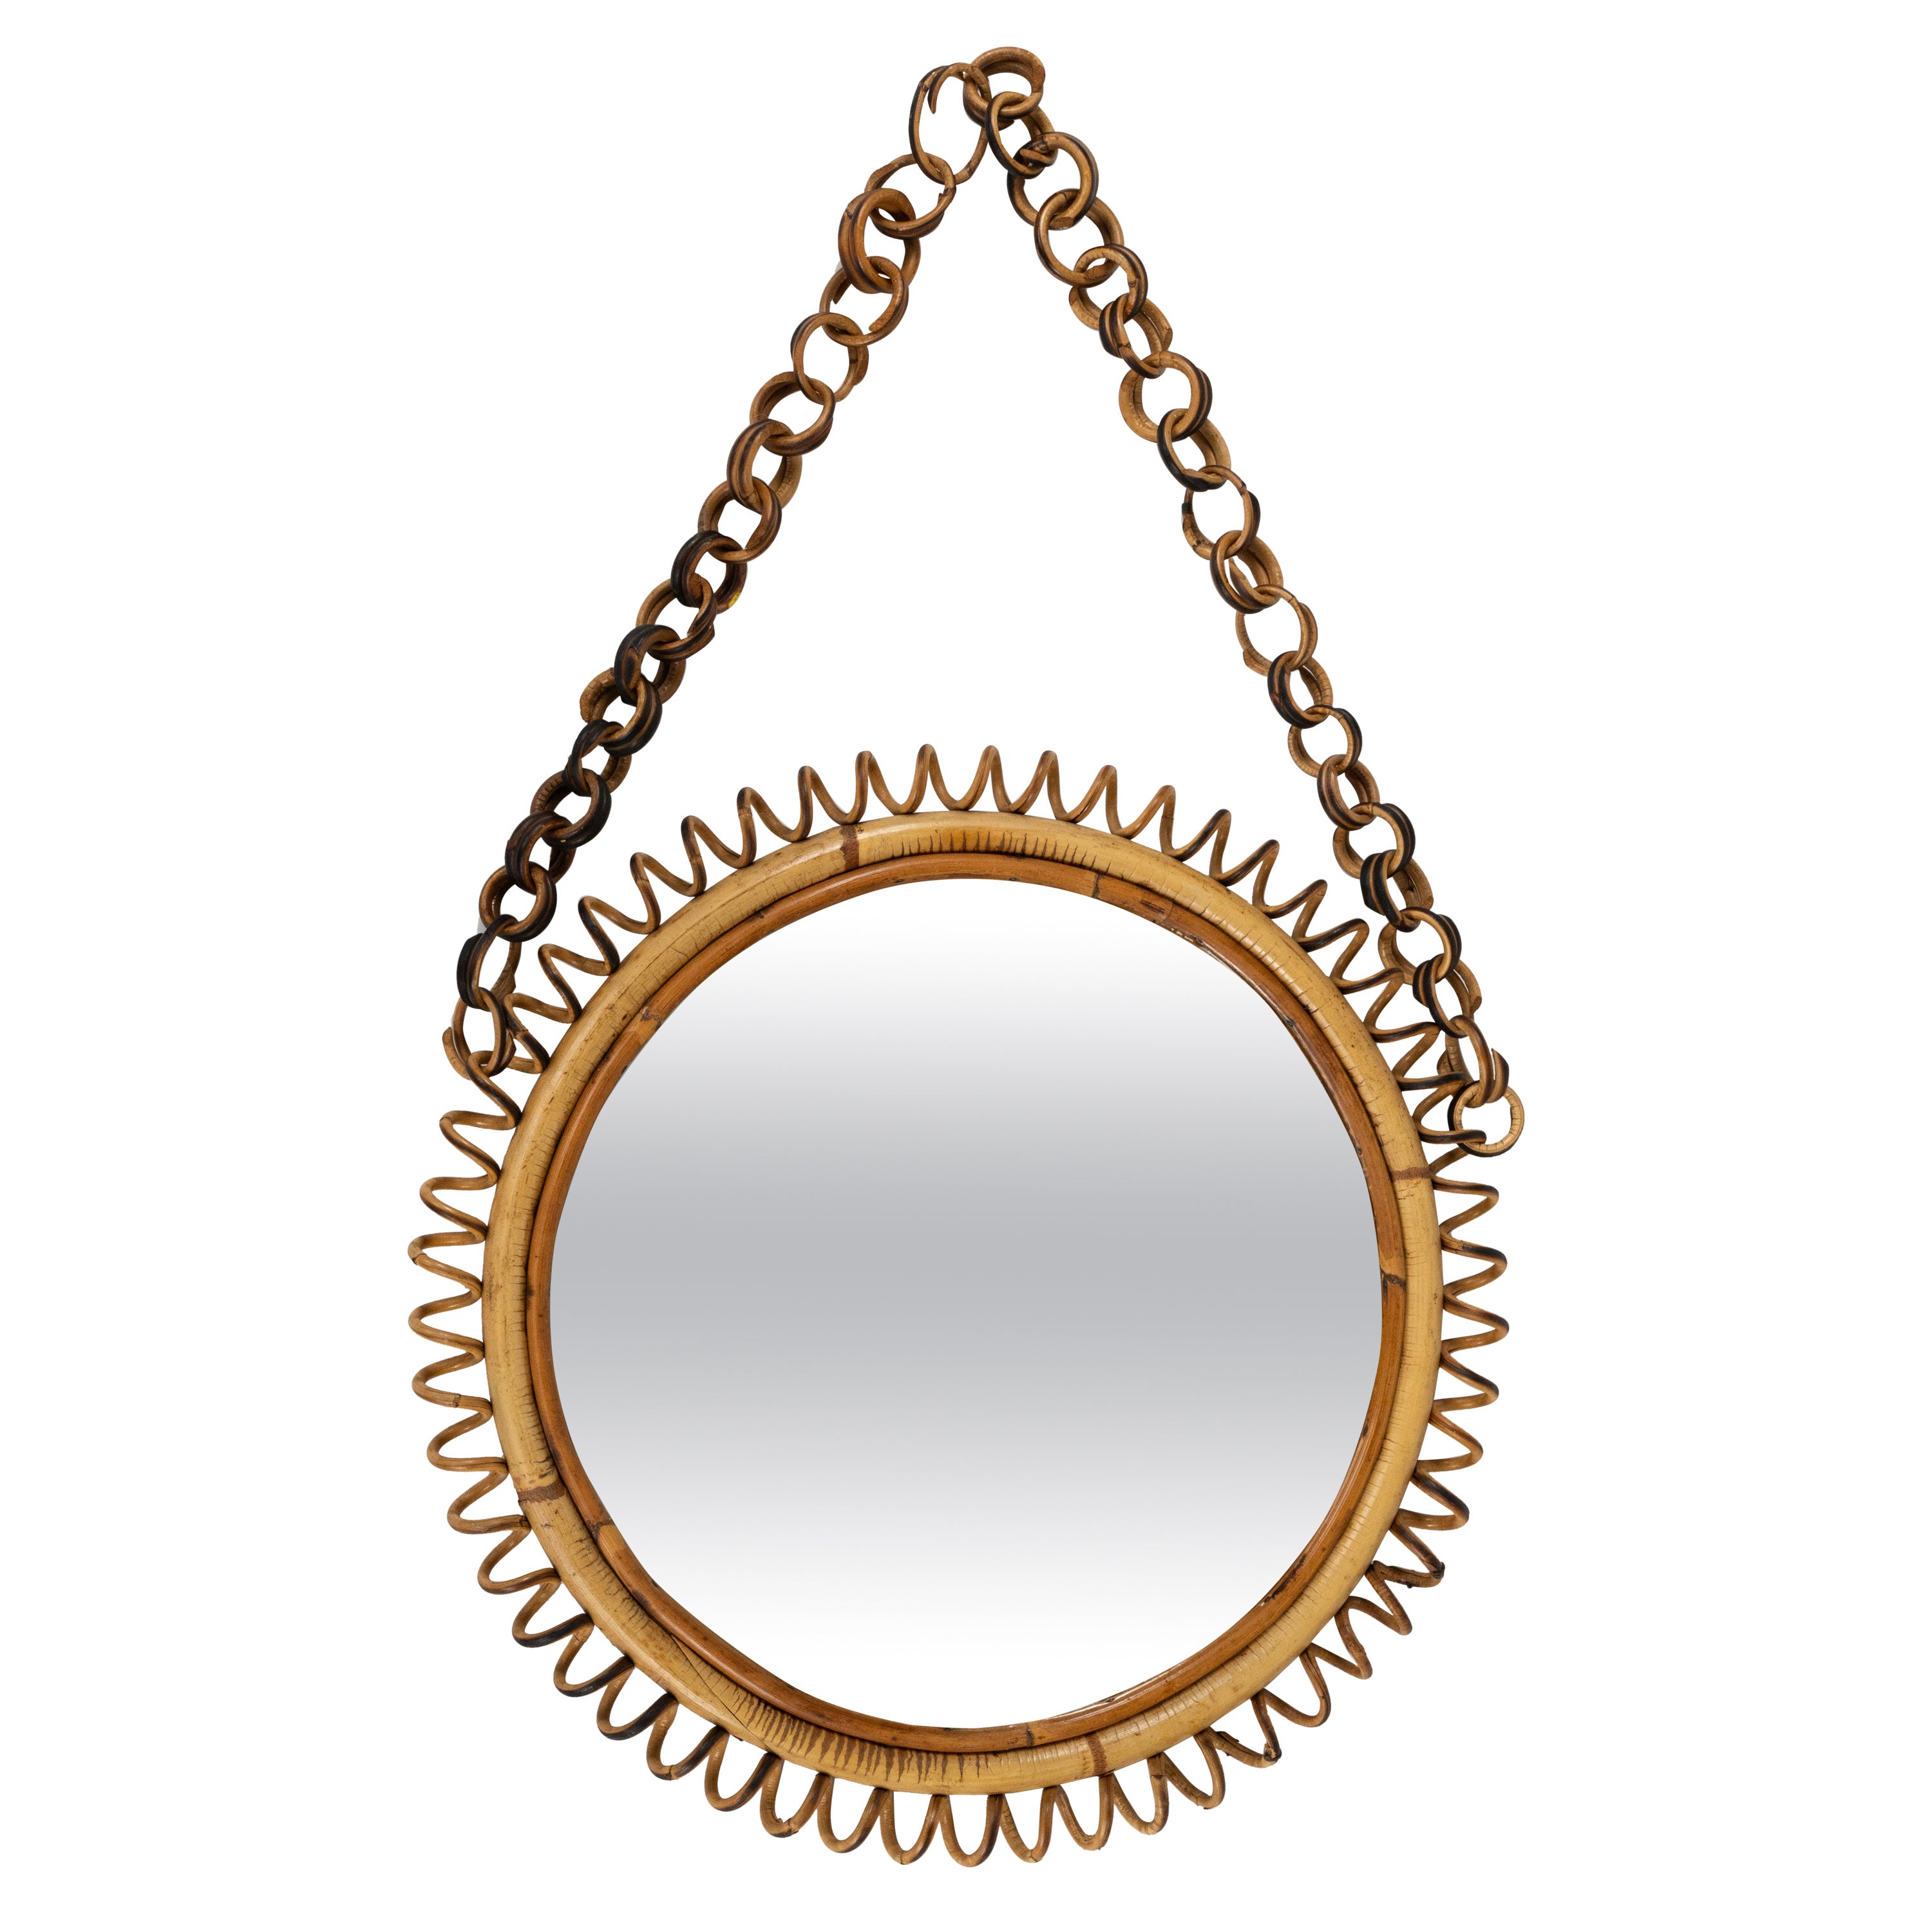 Midcentury Rattan and Bamboo Round Wall Mirror with Chain, Italy 1960s